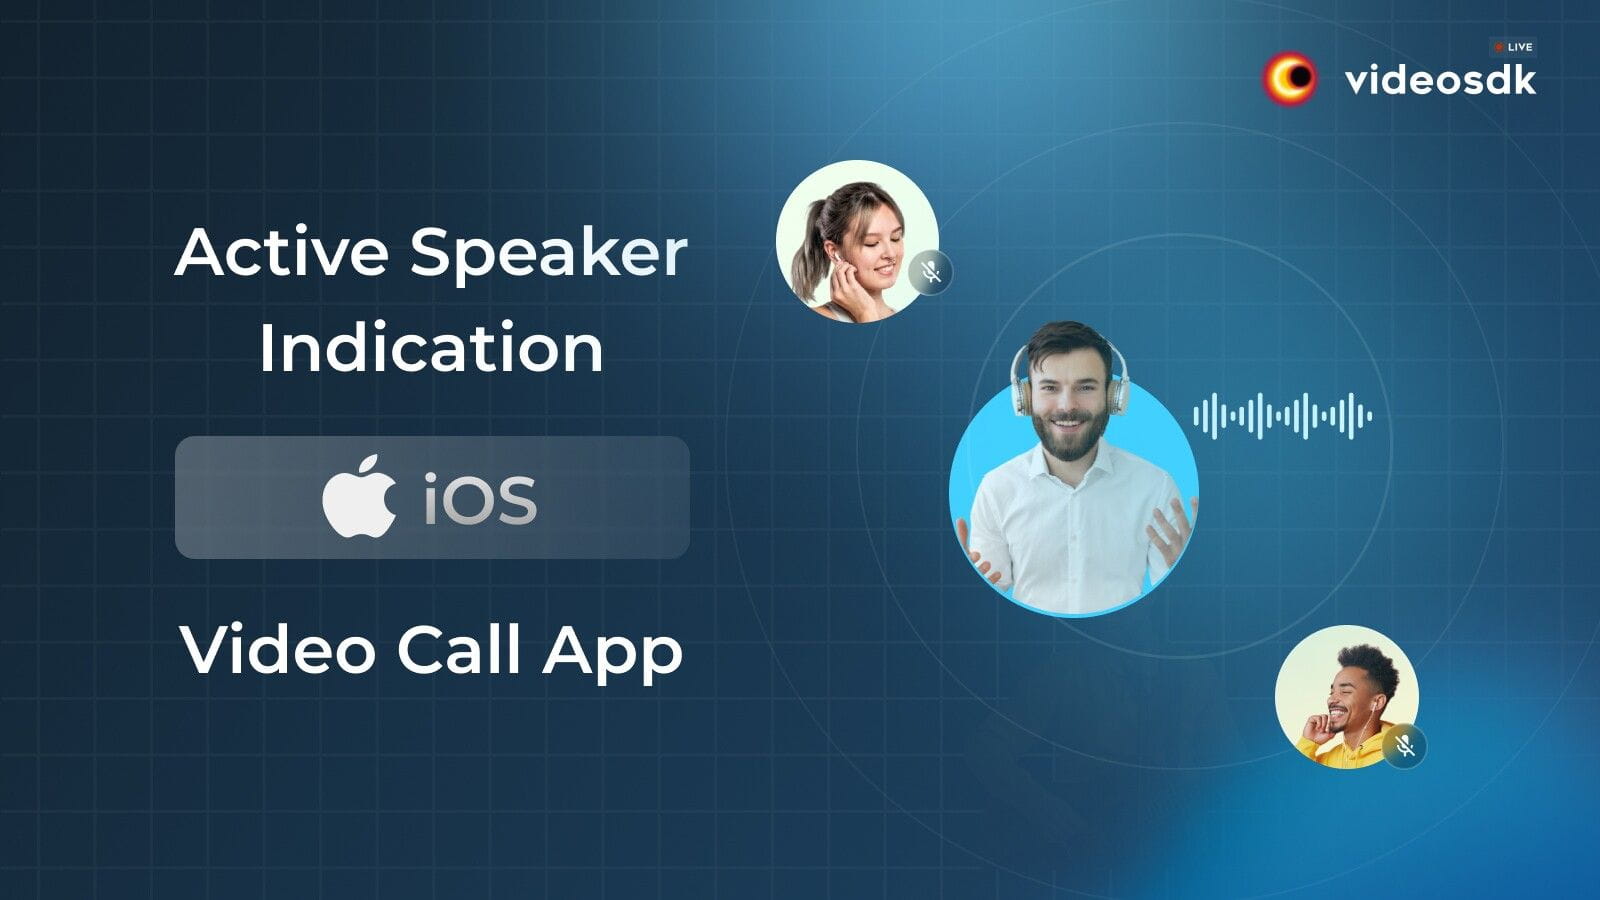 How to Integrate Active Speaker Indication in iOS Video Call App?